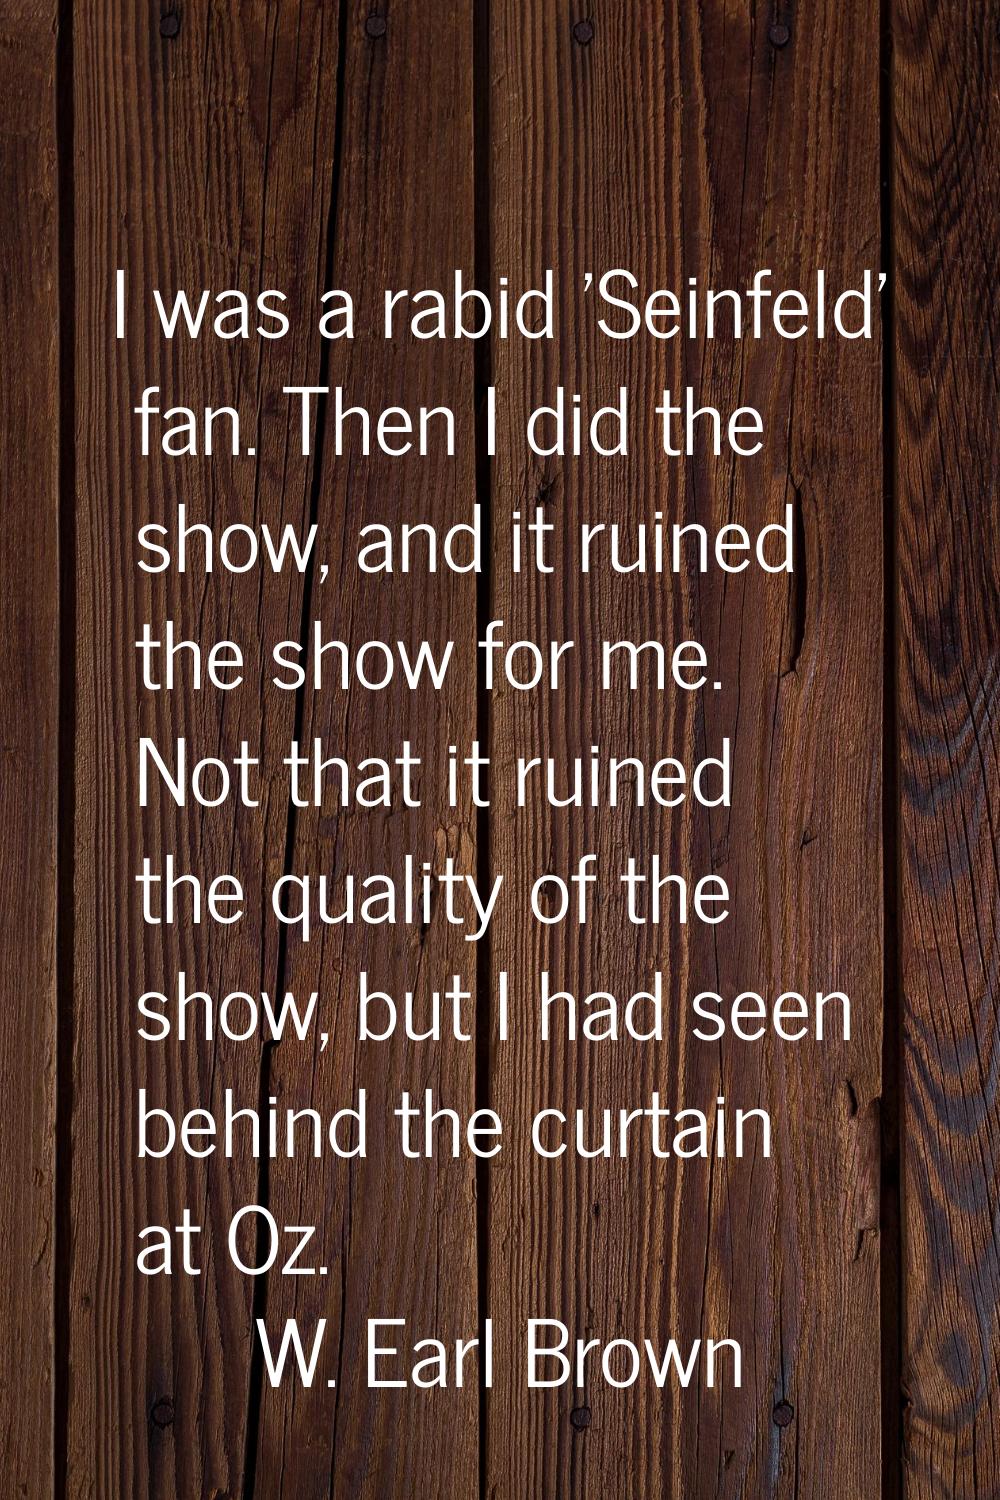 I was a rabid 'Seinfeld' fan. Then I did the show, and it ruined the show for me. Not that it ruine